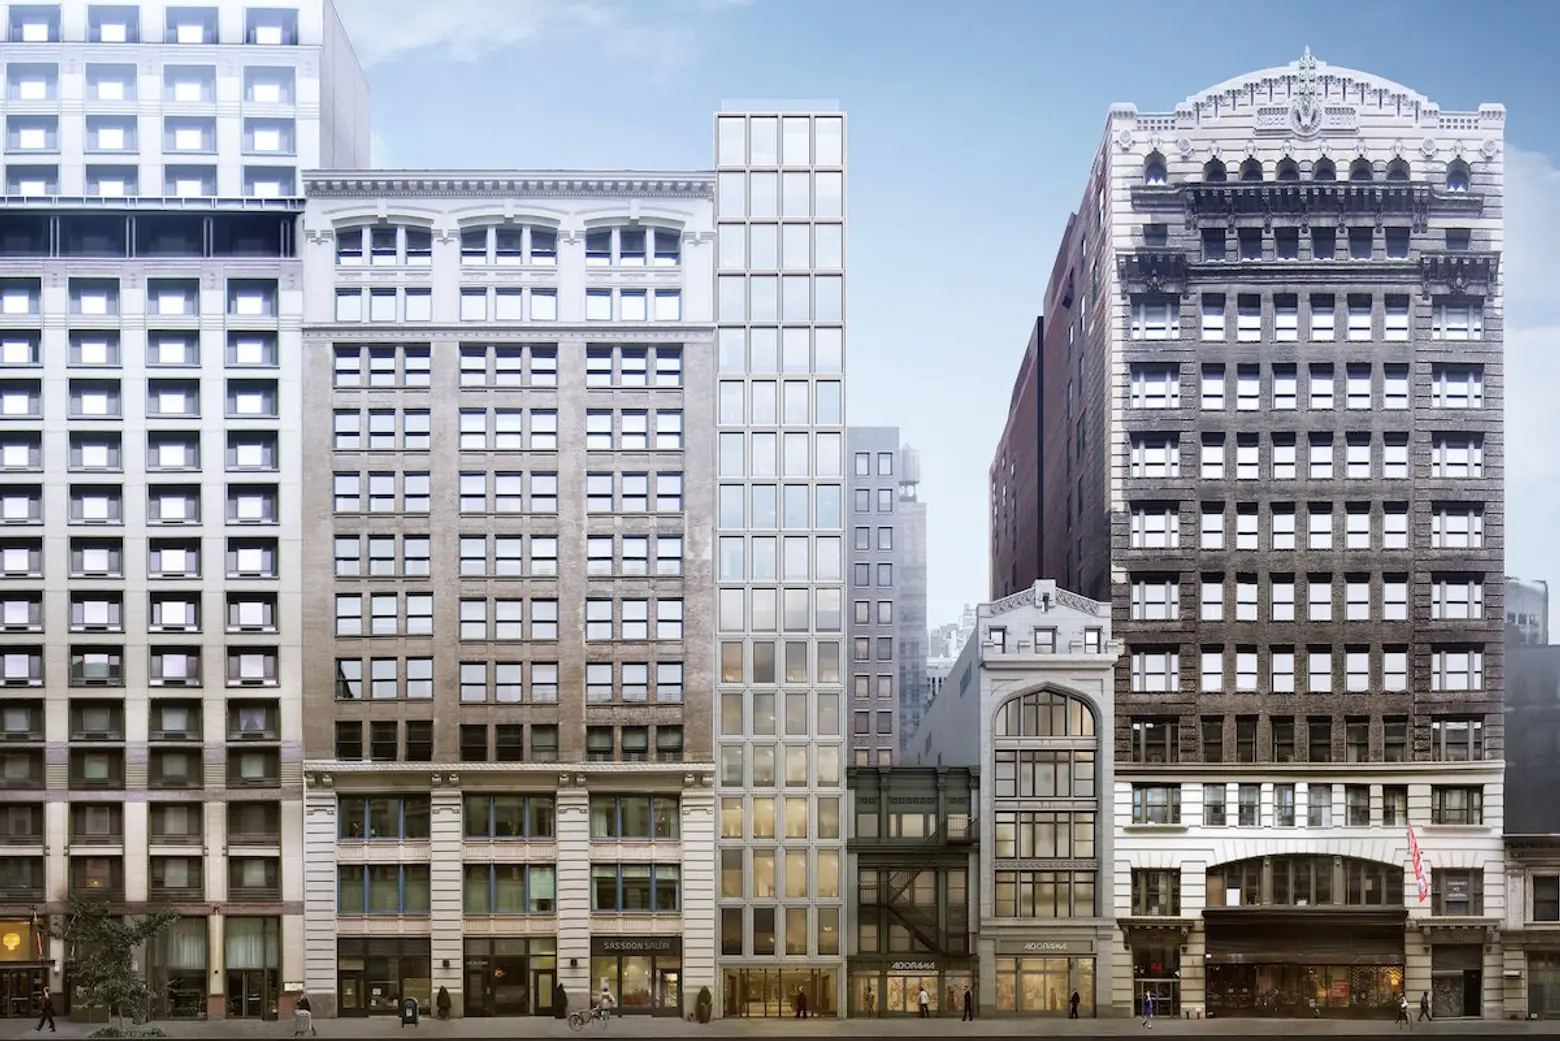 Sixth Avenue Adorama Site May Be the First Battle Over Mayor’s New Housing Program